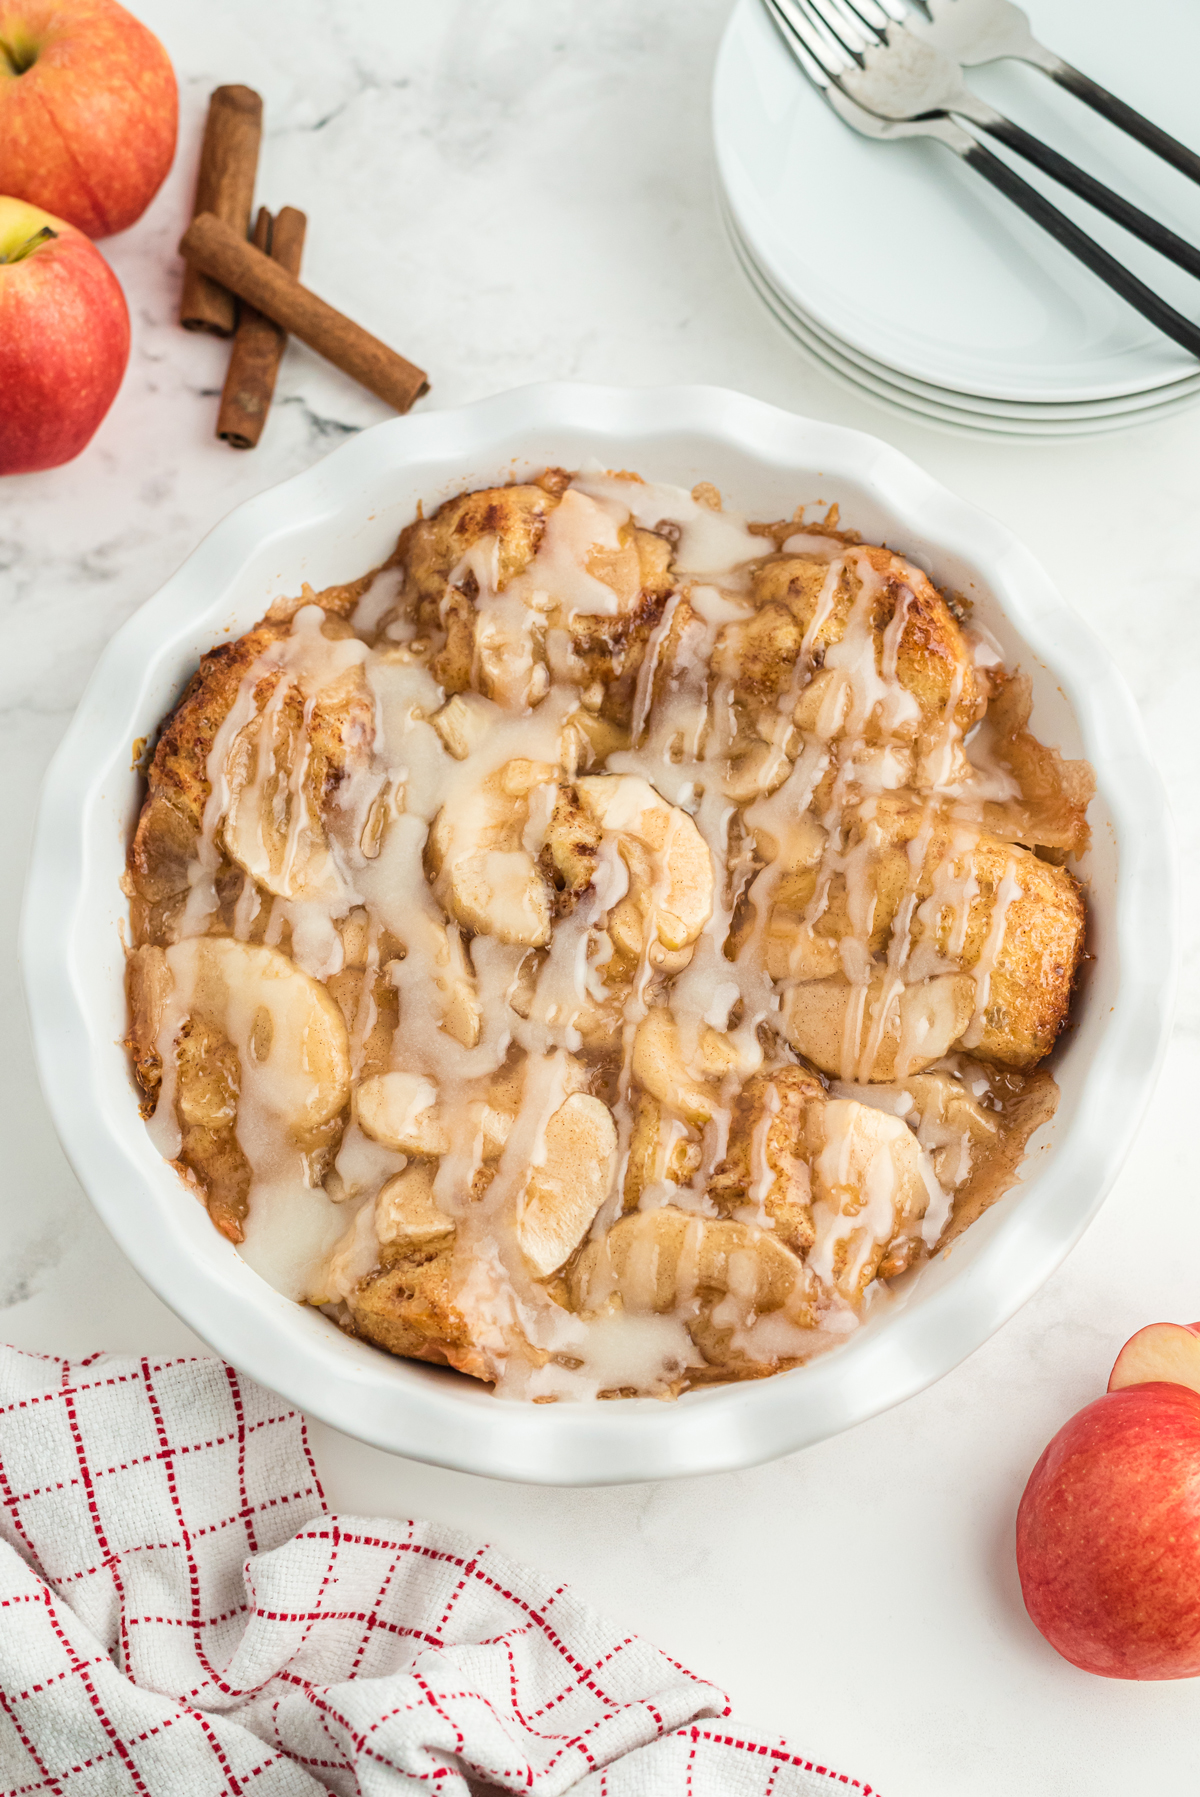 Top view of cinnamon Roll Apple Bake in a white pie dish with frosting drizzled over it.